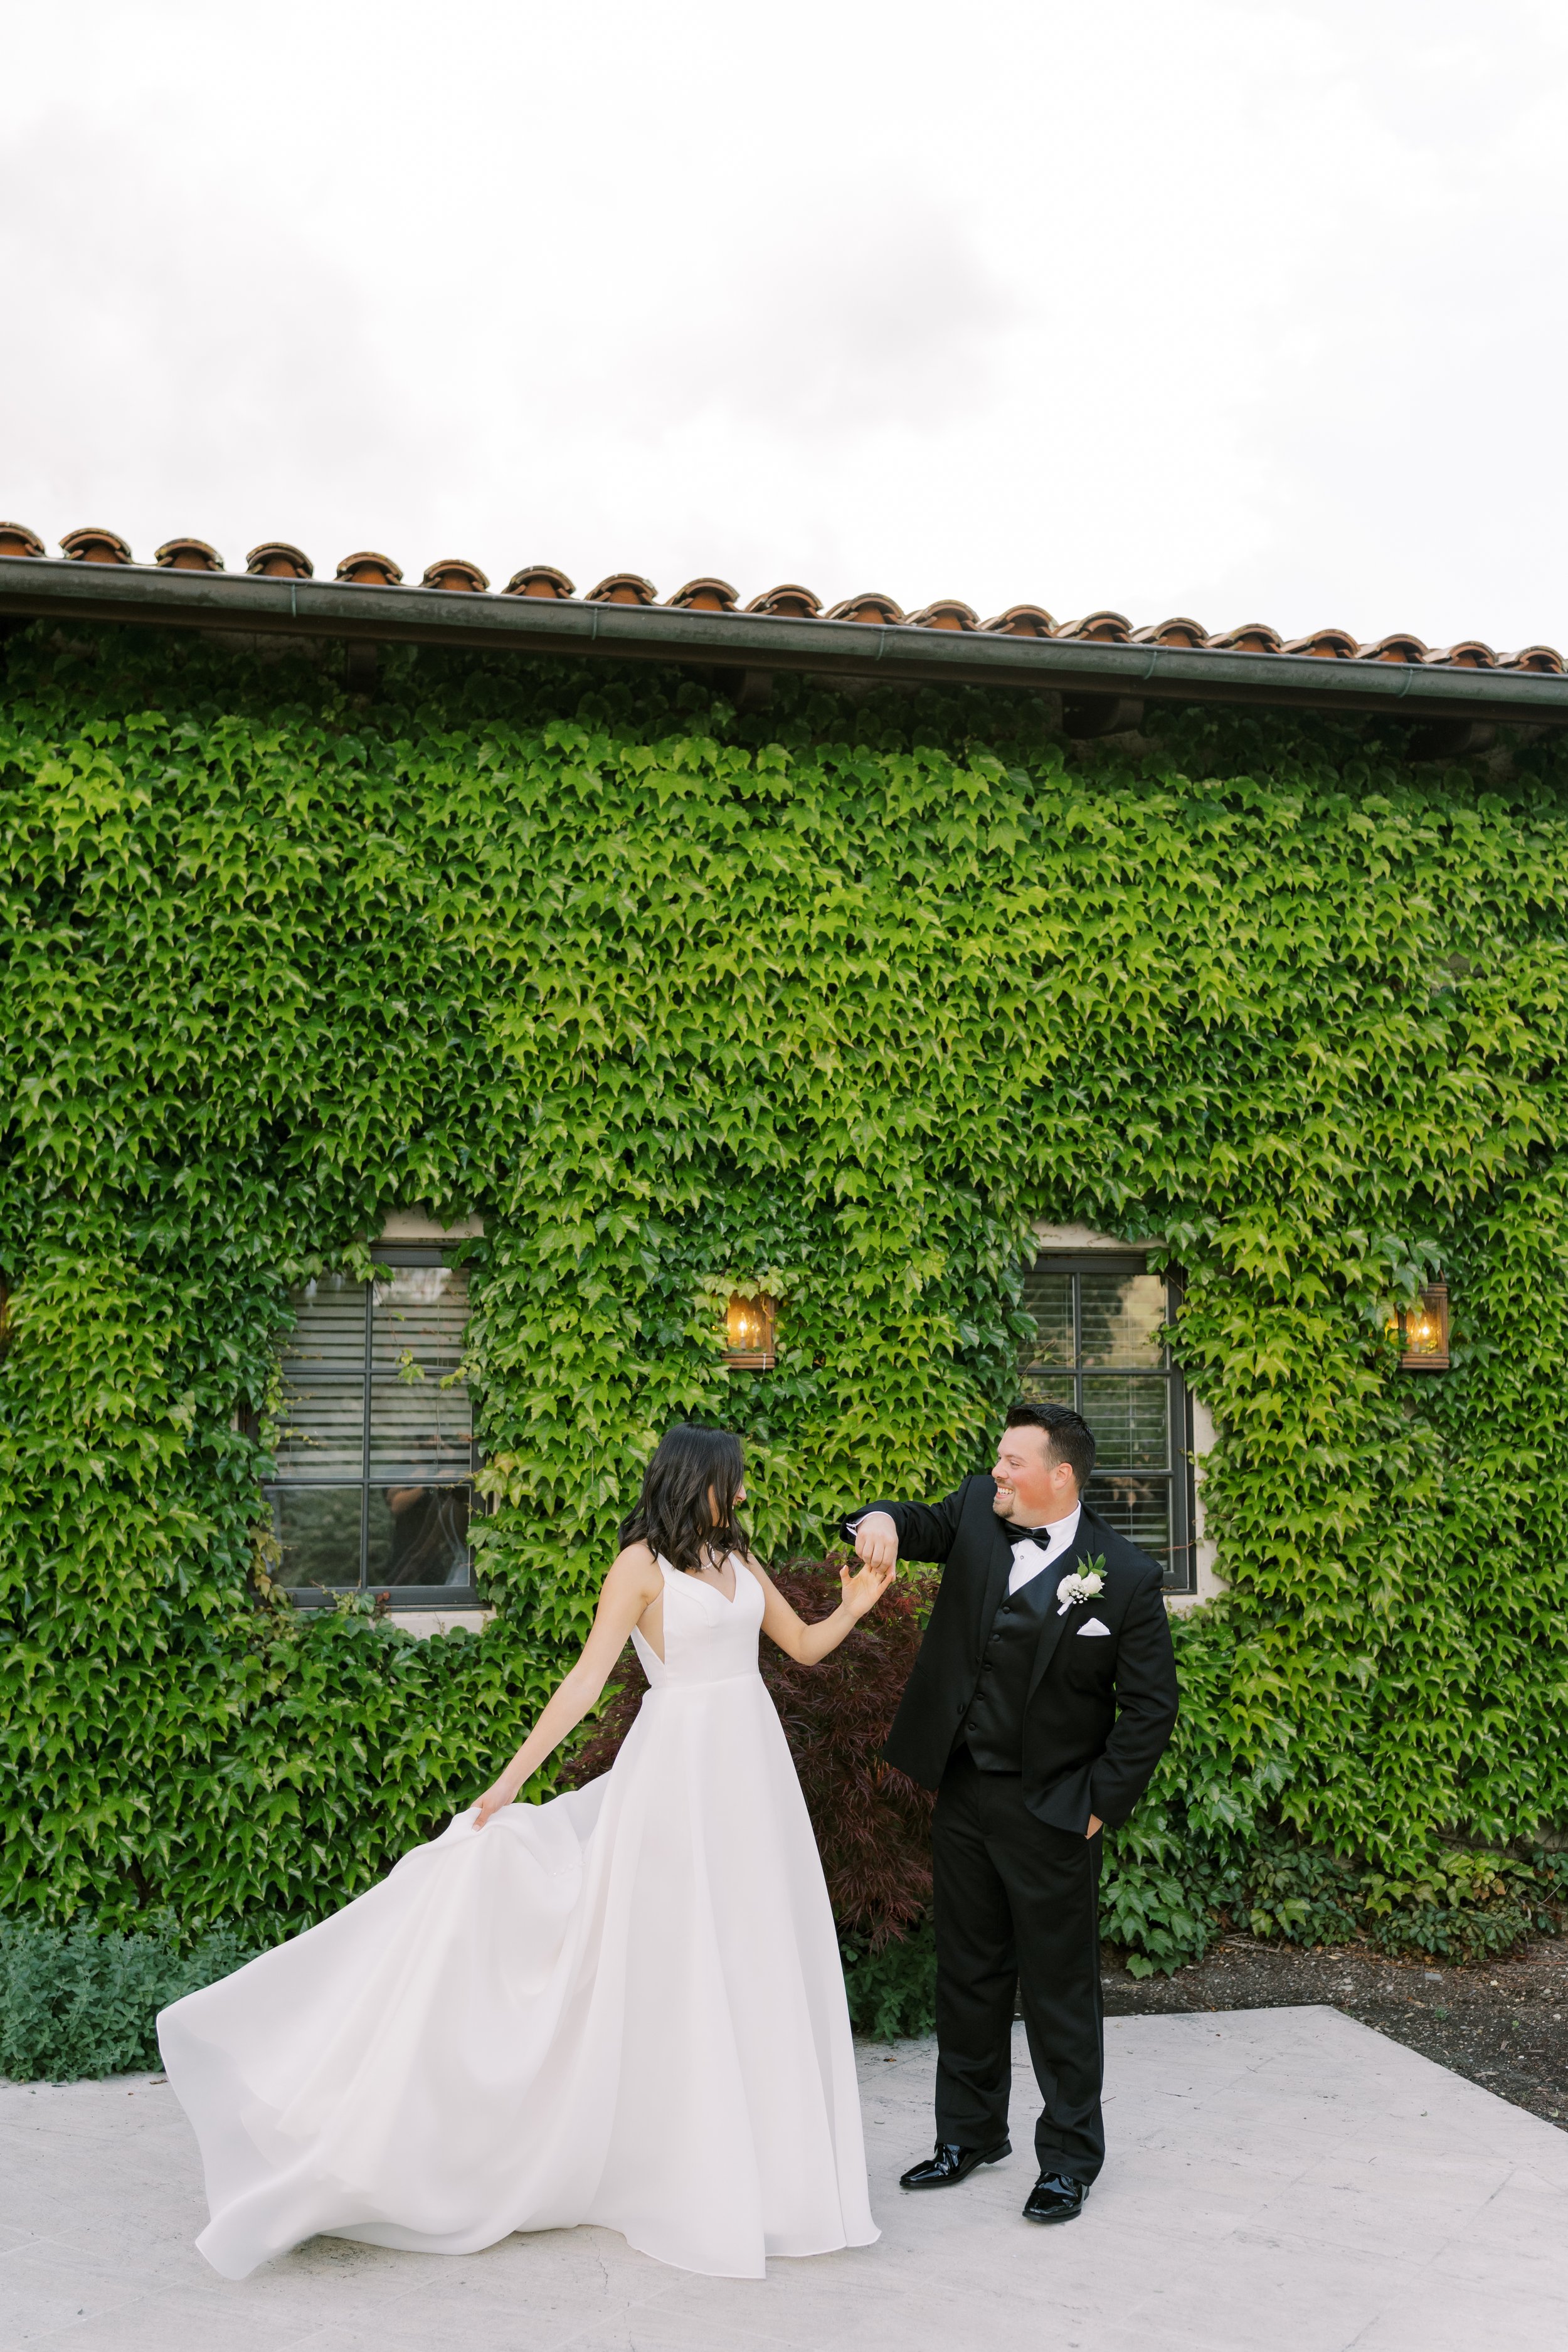 Clos LaChance Winery Wedding - Jacqueline & Colby-406.jpg